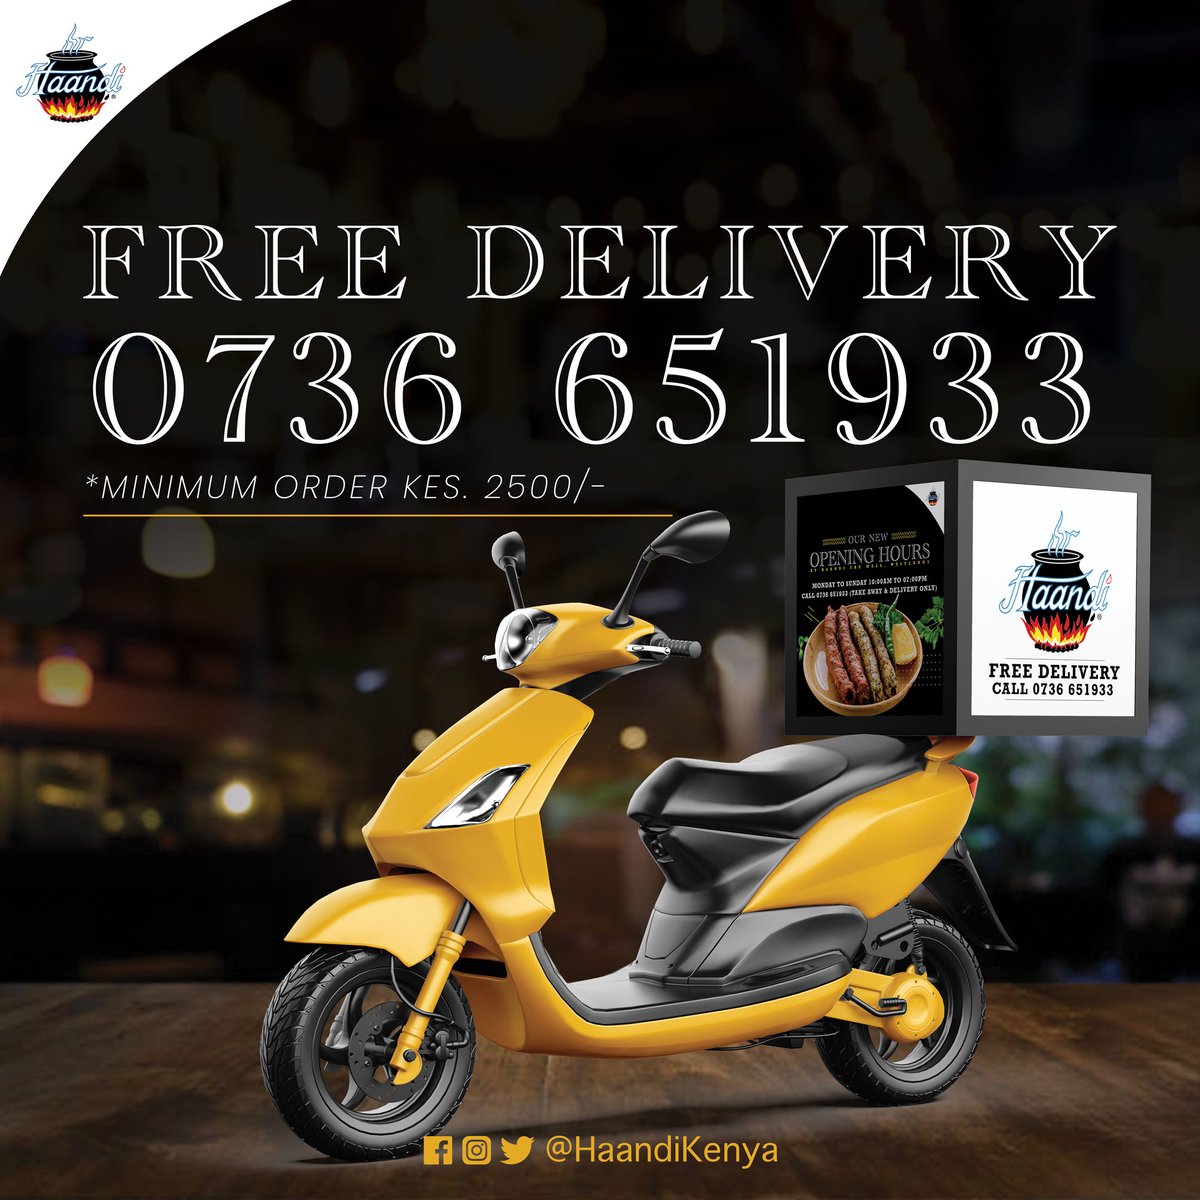 Let us do the cooking and the delivery while you sit back and enjoy. Call 0736 651933 to #ExperienceHaandi now.